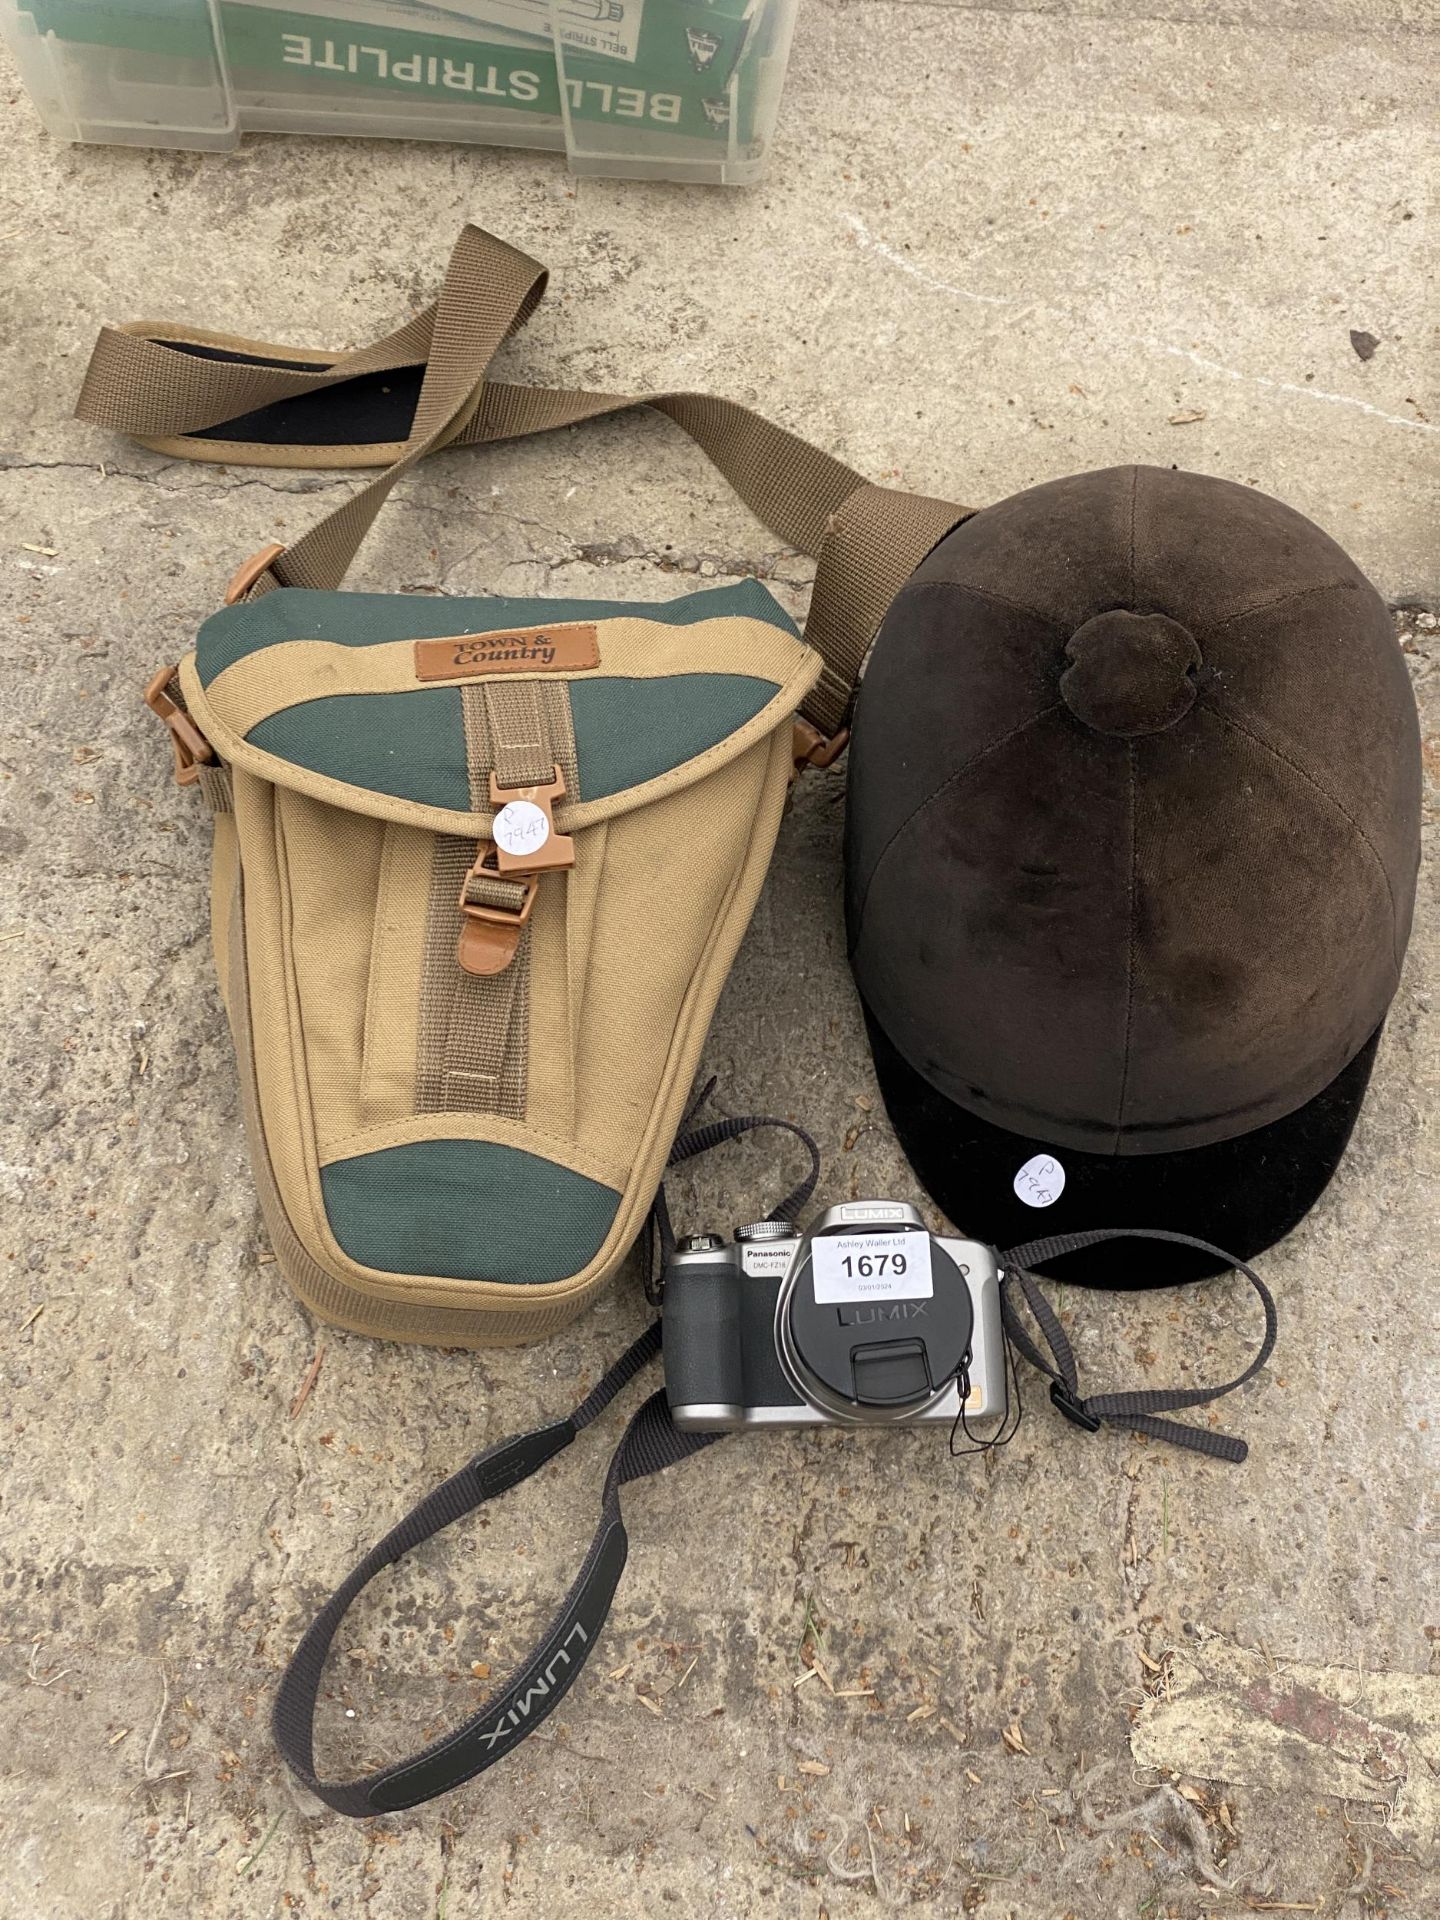 A HORSE RIDING HAT, A TOWN AND COUNTRY SATCHEL AND A LUMIX CAMERA